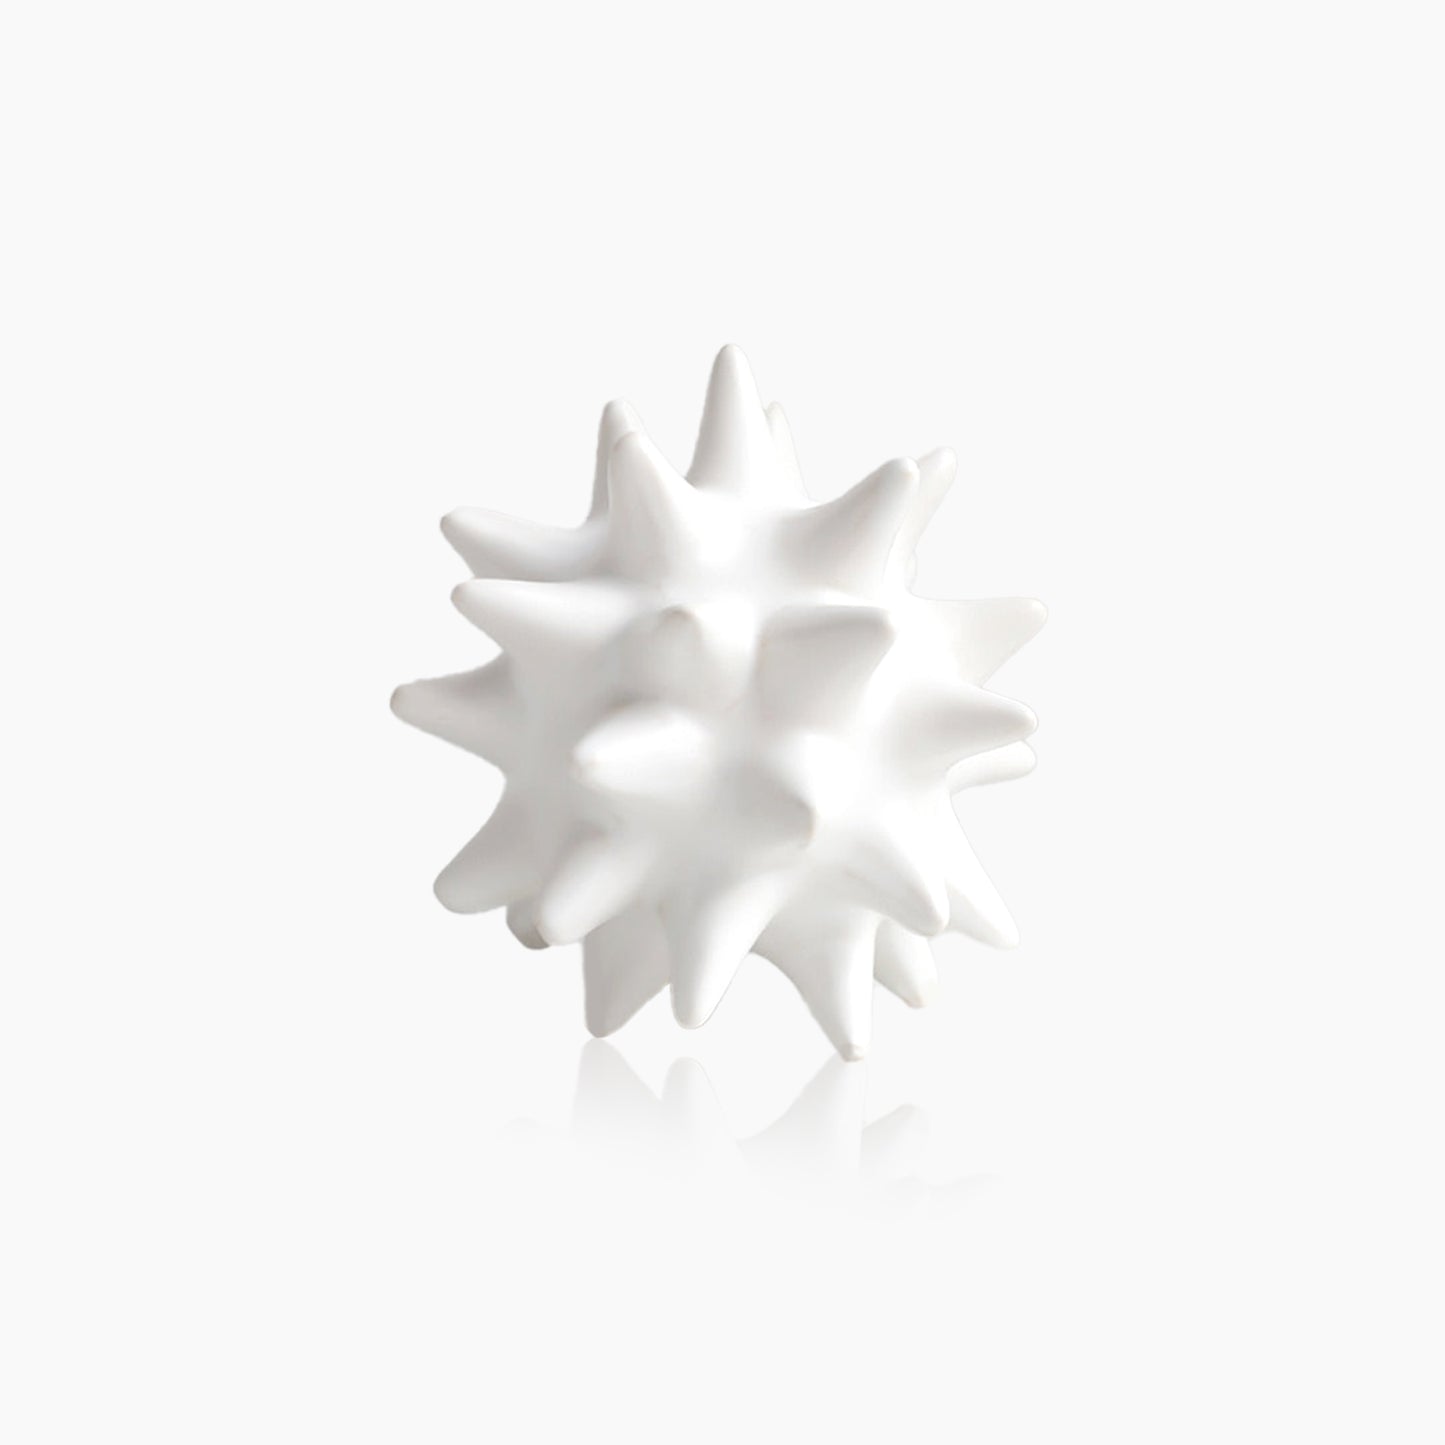 Sea Urchin Hand-Crafted Ornament